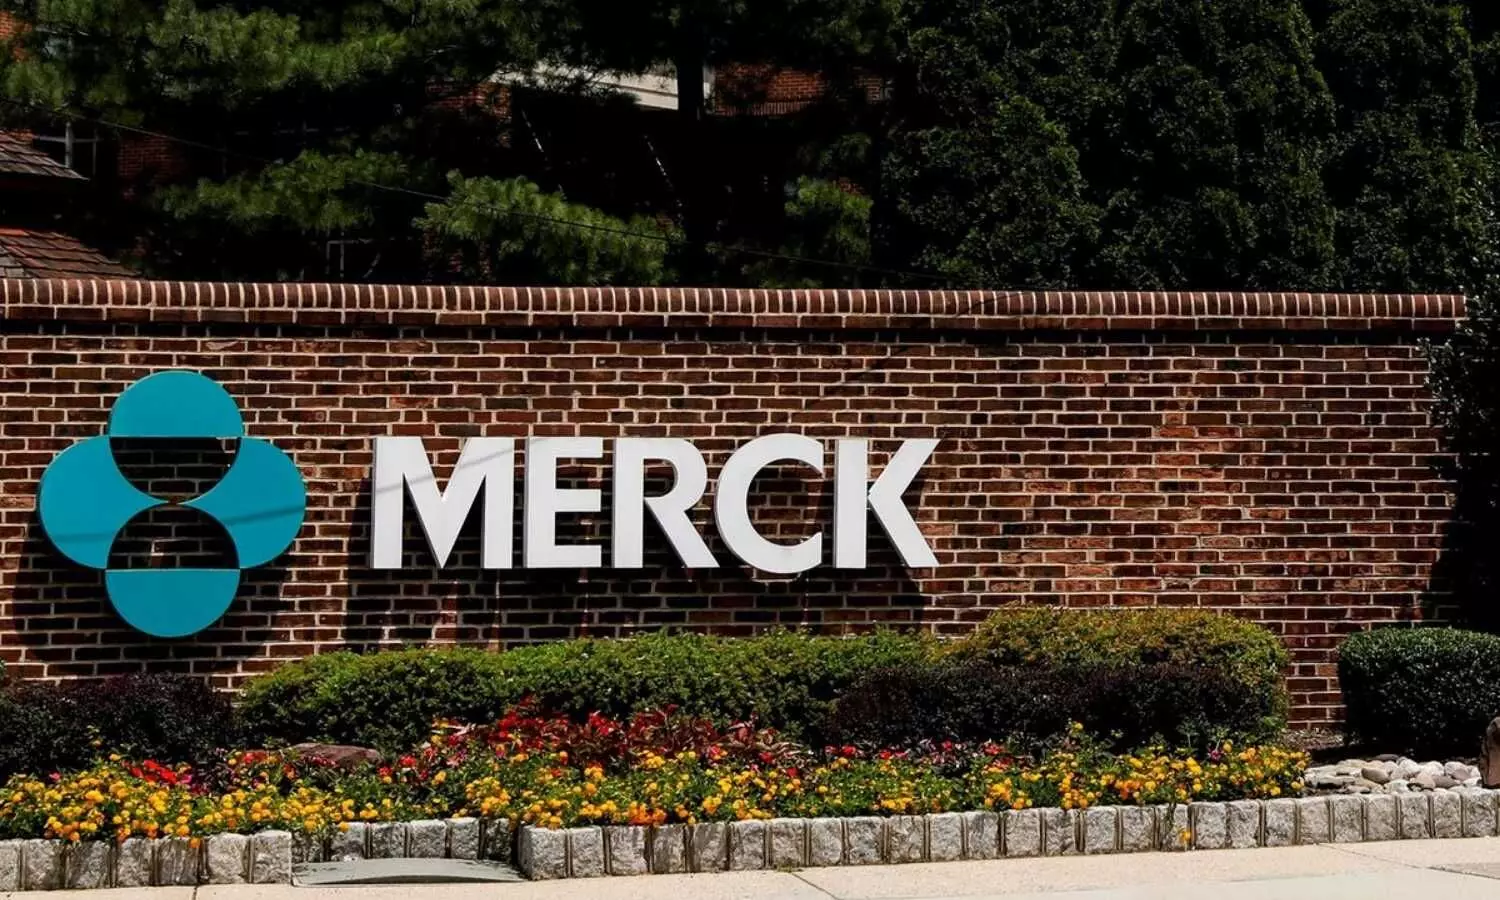 KEYTRUDA plus chemotherapy improves overall survival versus chemotherapy alone to treat advanced malignant pleural mesothelioma: Merck